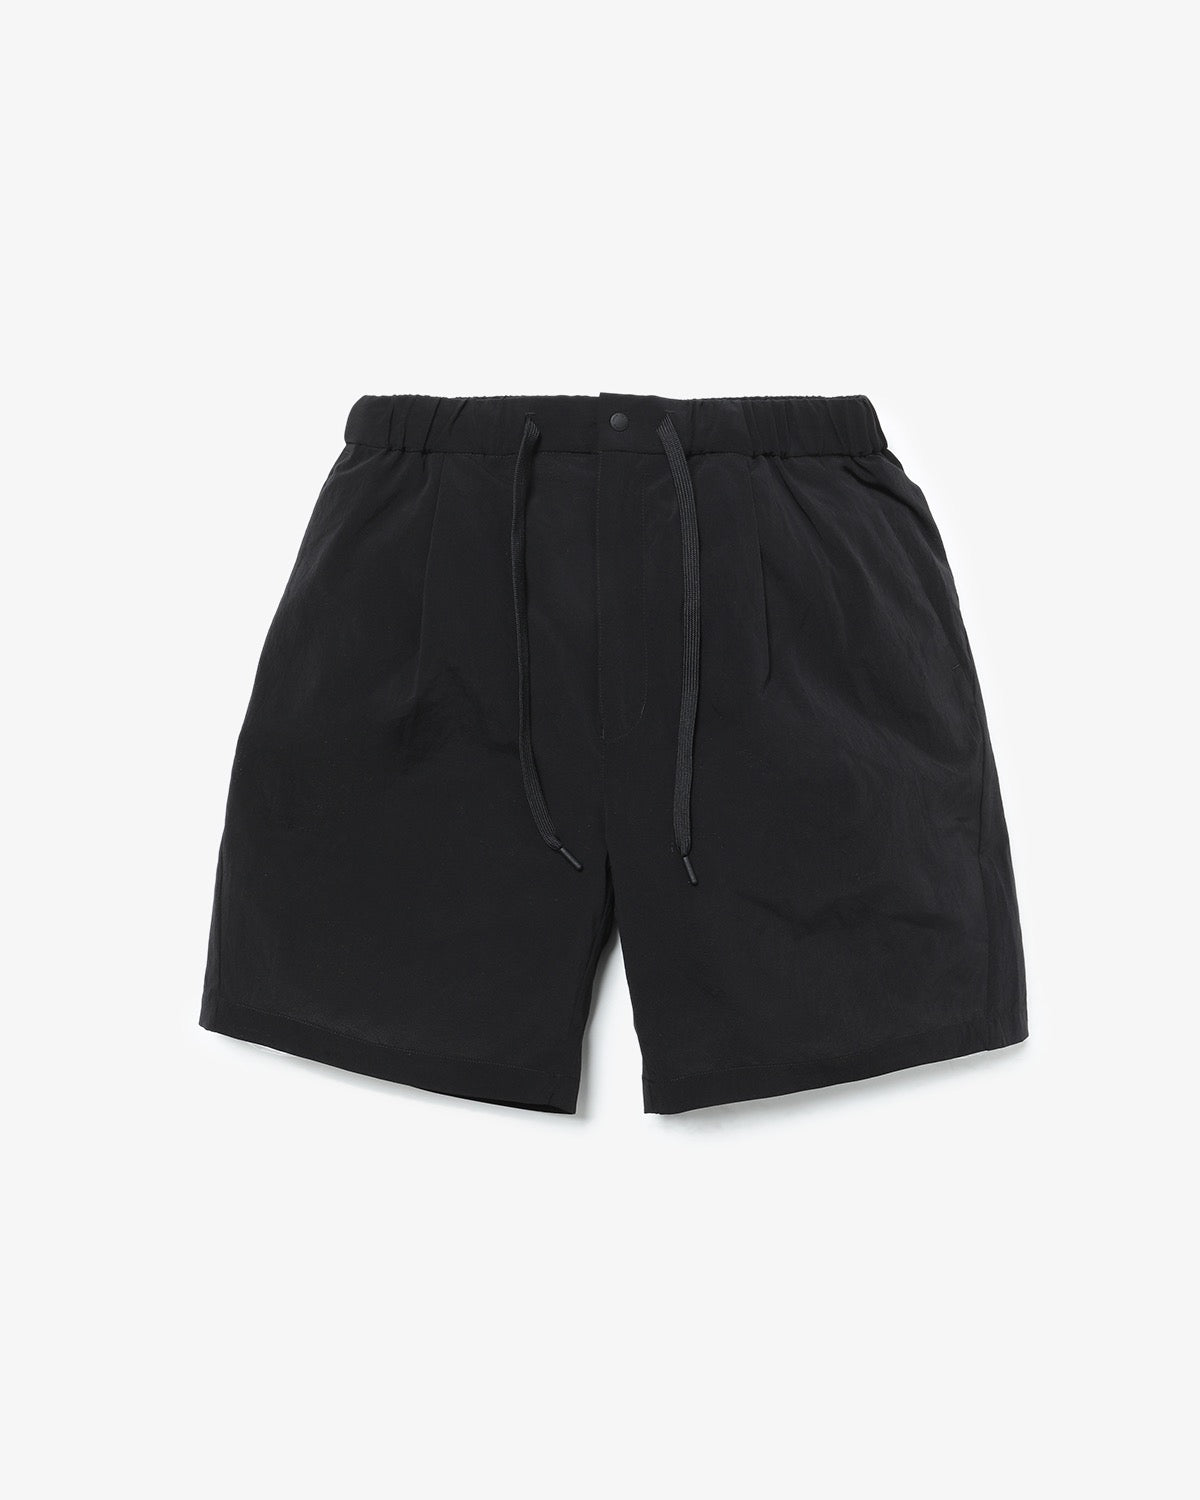 BREATHABLE QUICK DRY SHORTS